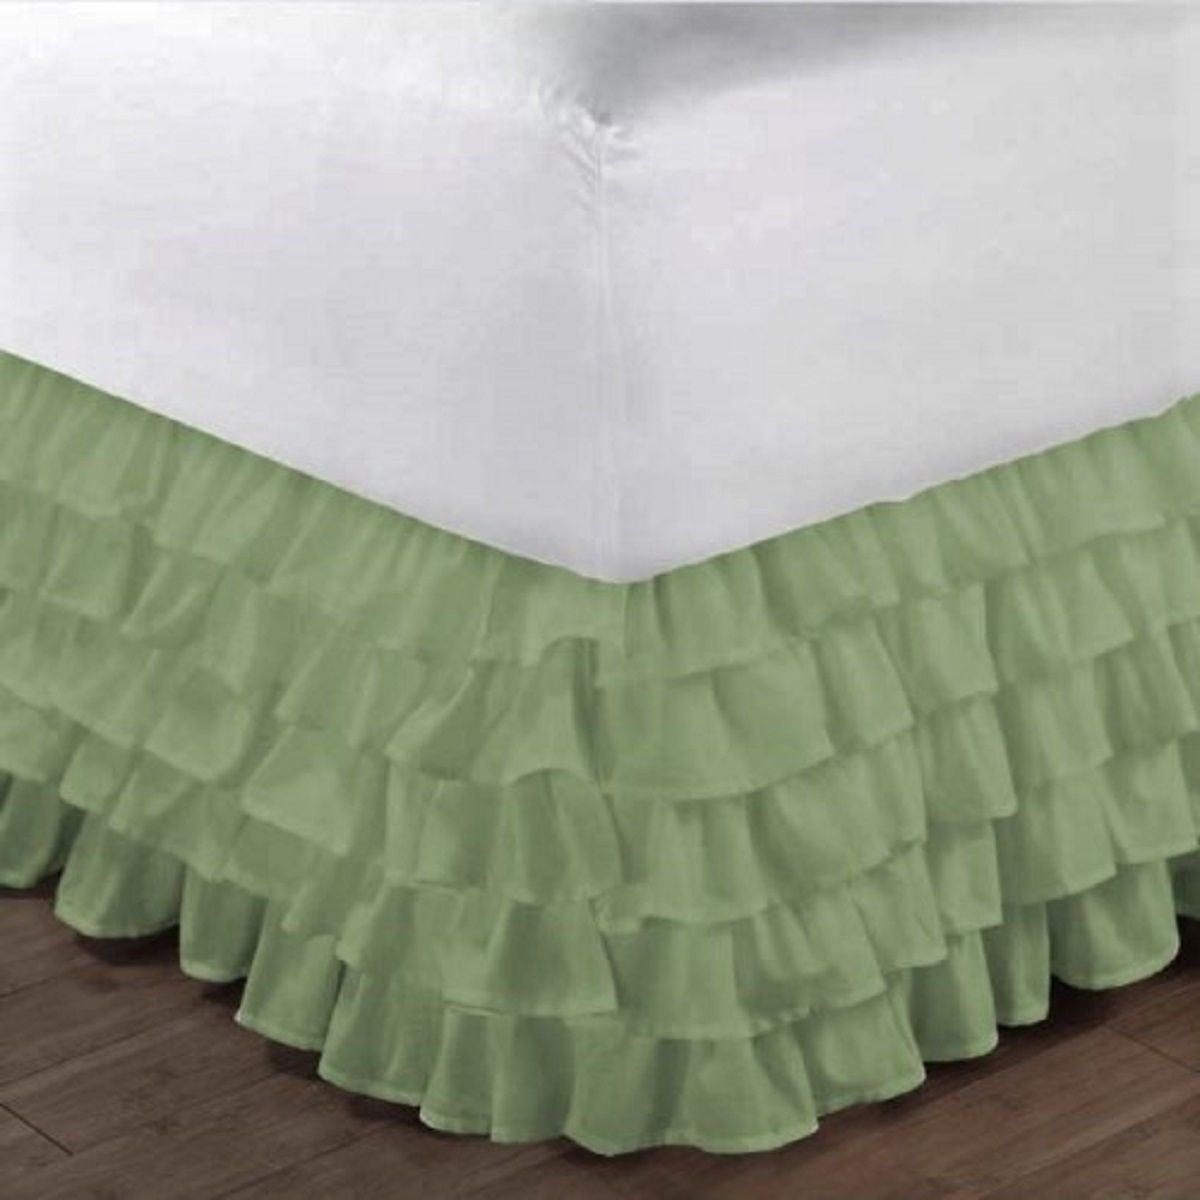 1 SAGE GYPSY SOLID MULTI RUFFLE DRESSING BED SKIRT WITH PLATFORM 20" INCH DROP 